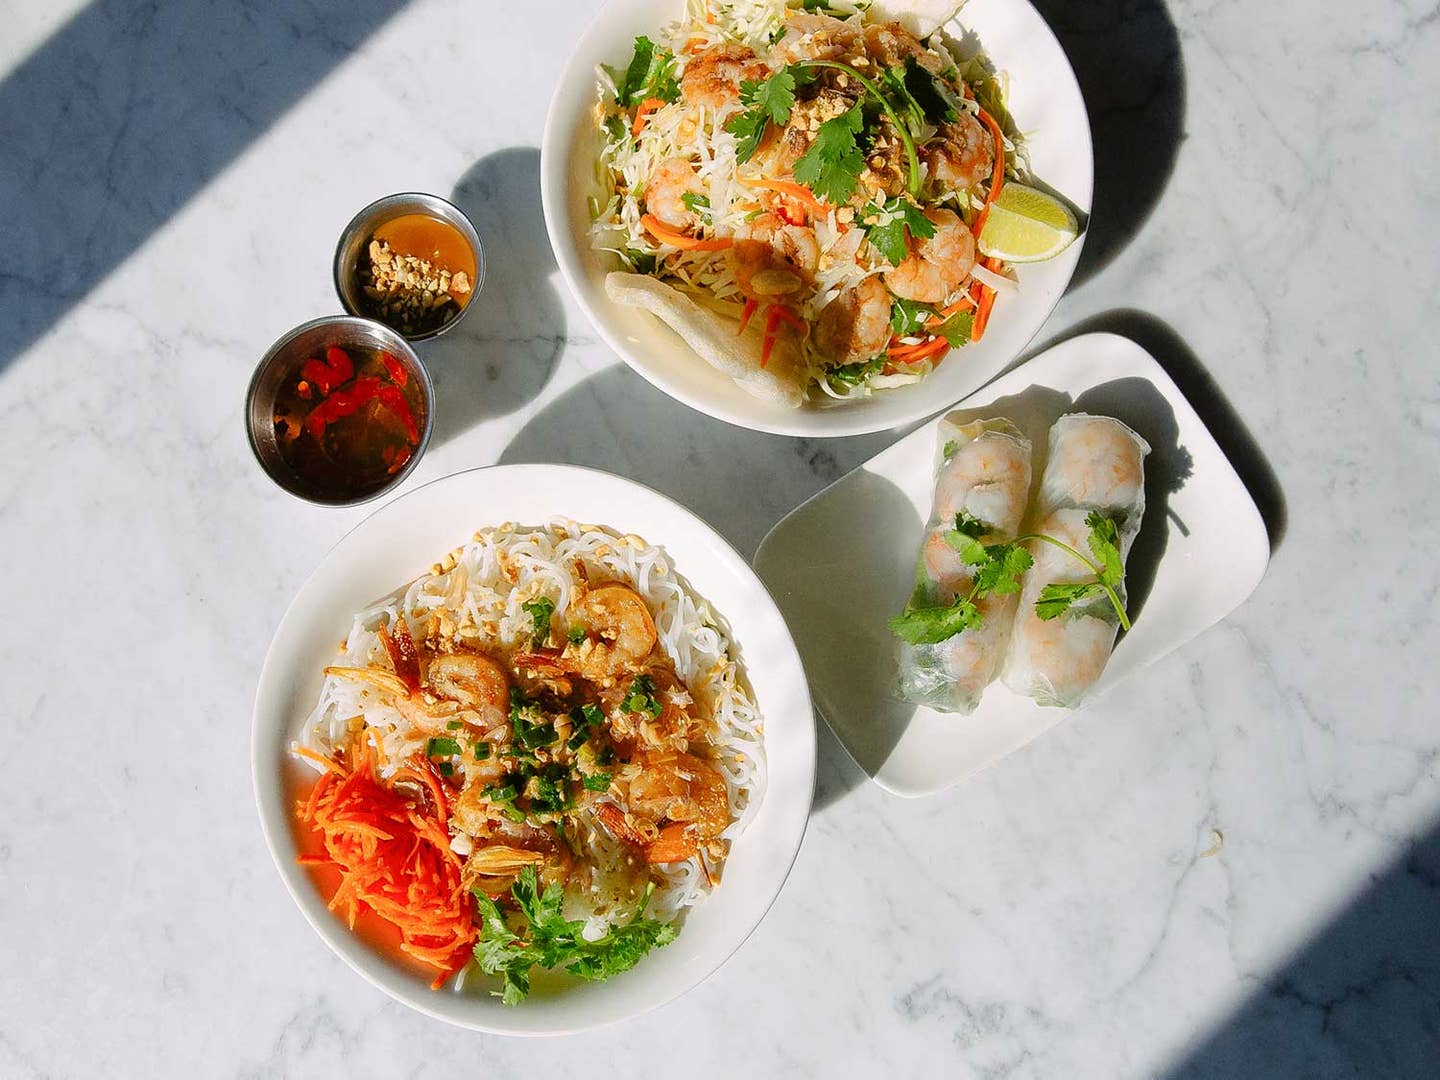 Where to Eat Vietnamese Food in New Orleans